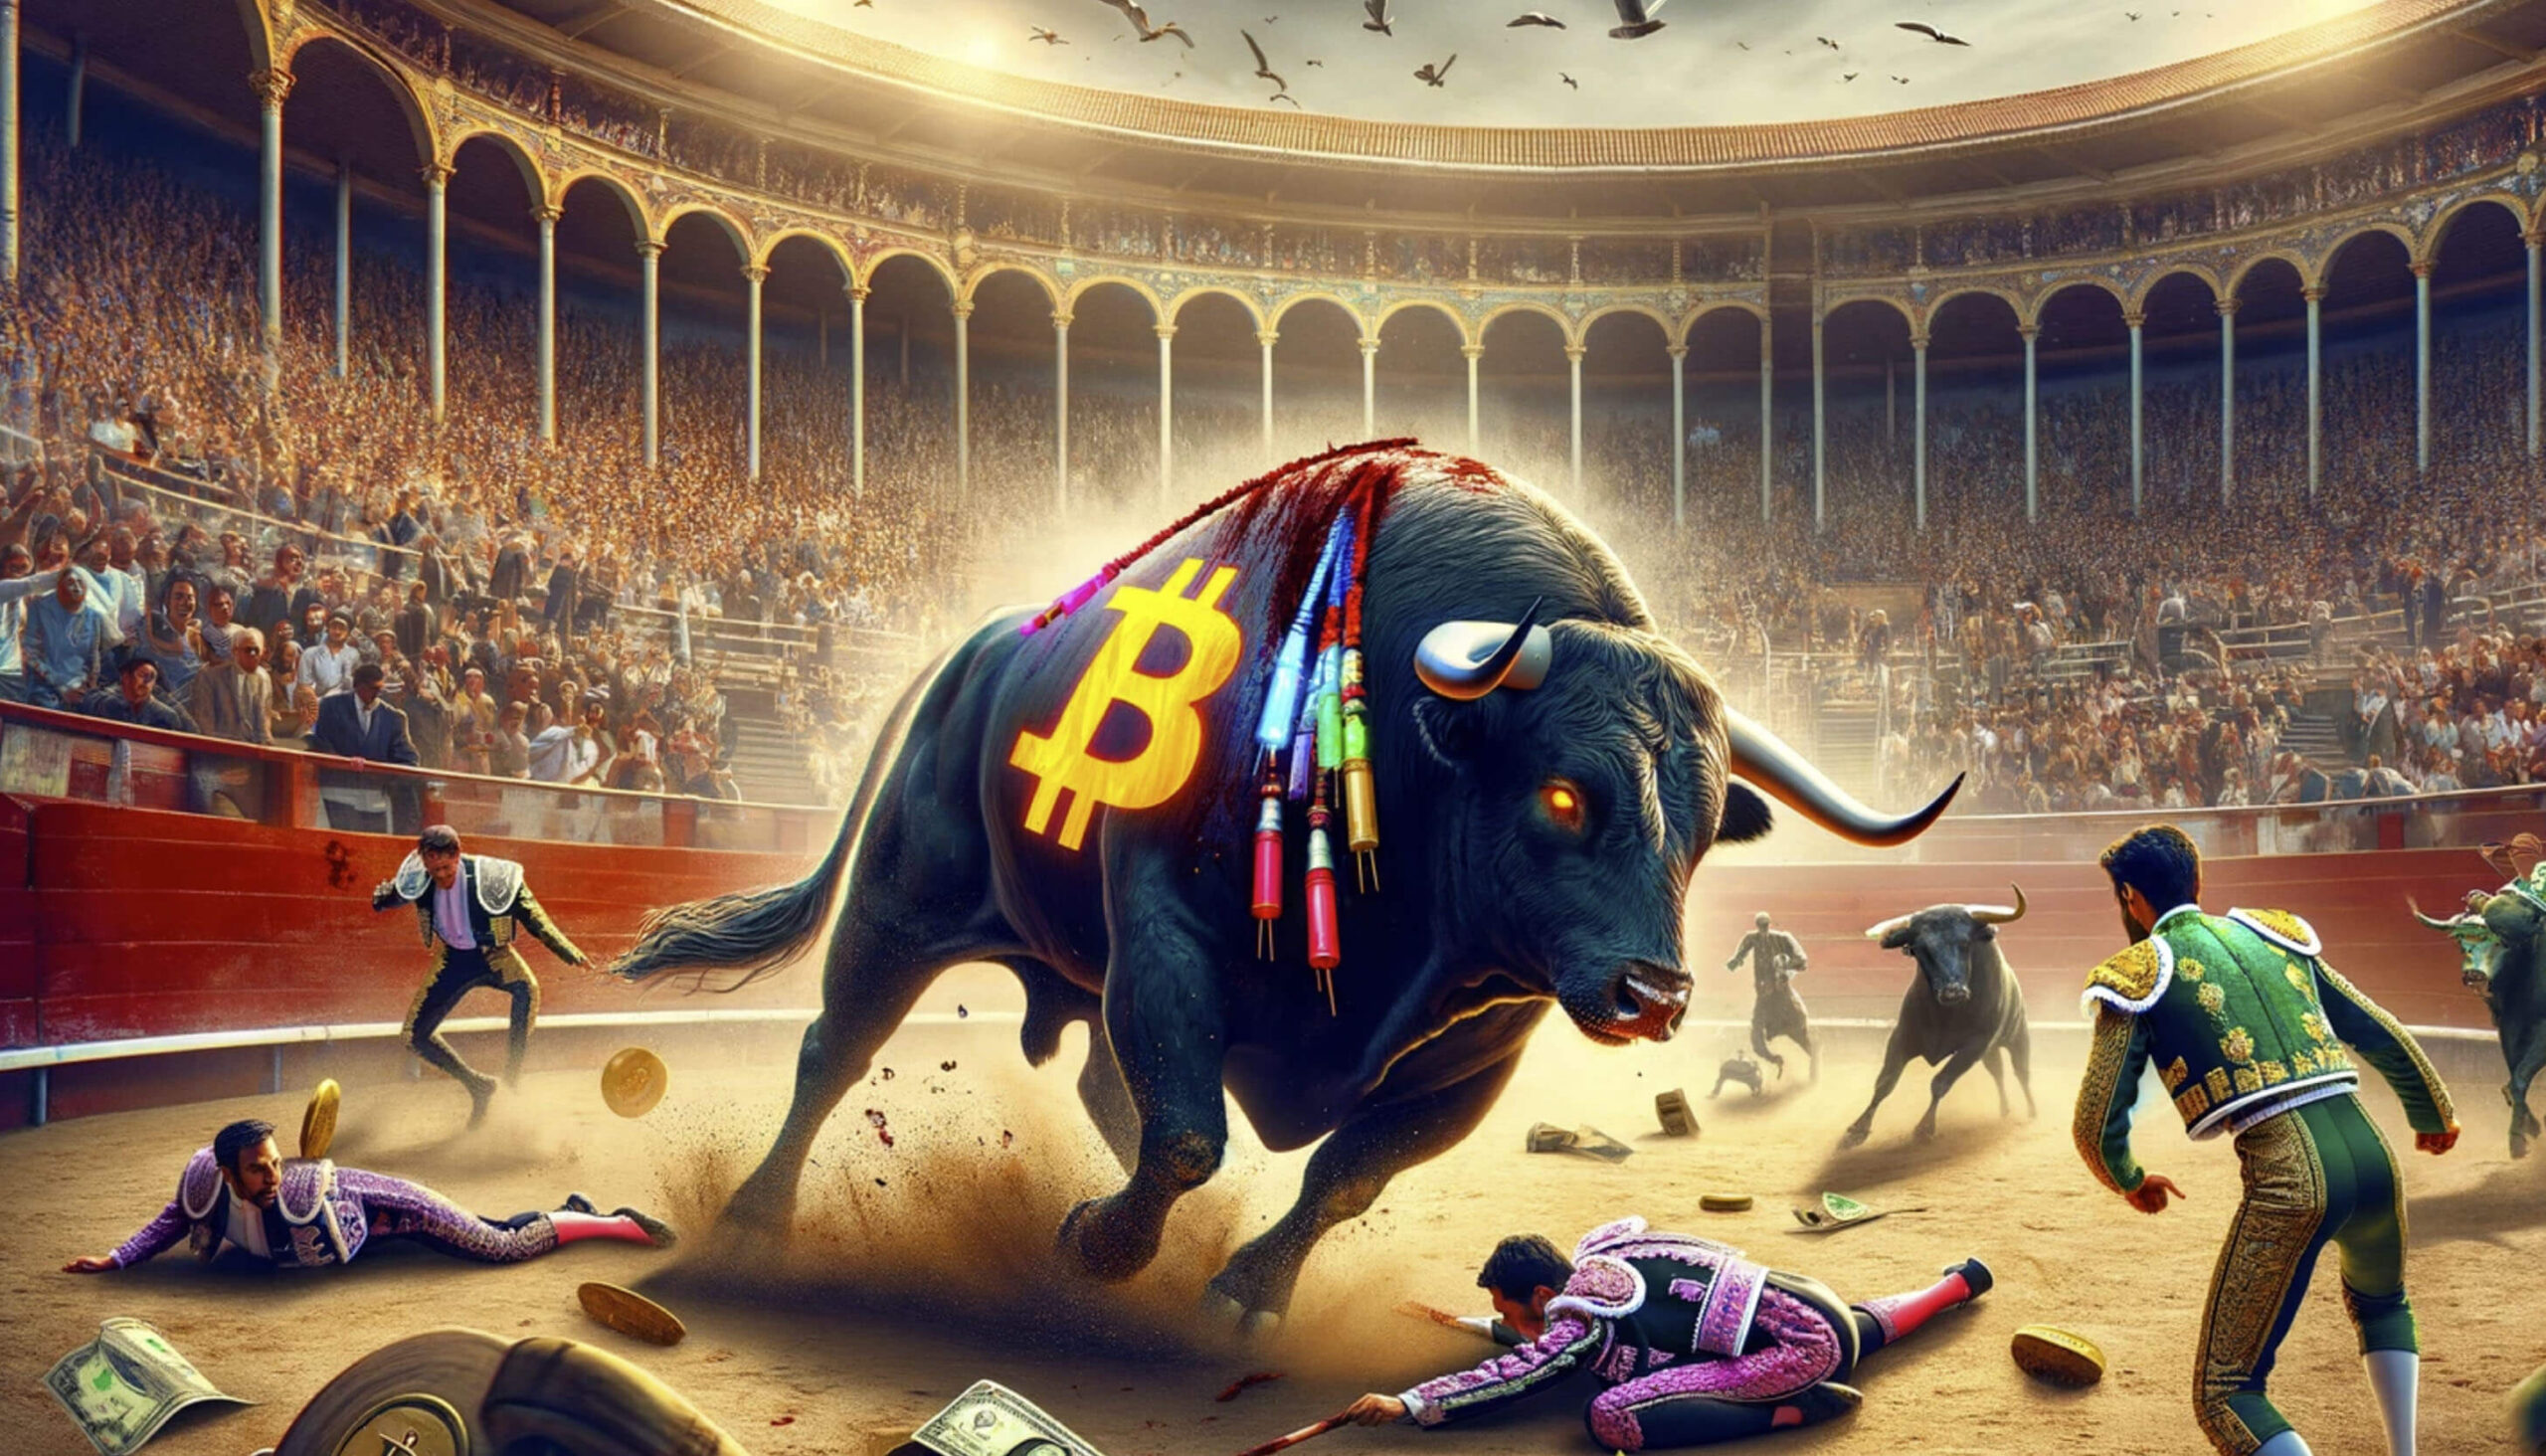 A traditional bullfight, where the bull with a Bitcoin symbol strong and unhurt is charging, Fallen matadors litter the floor in a stadium filled with cheering crowds, a few old dusty banknotes blow in the air.